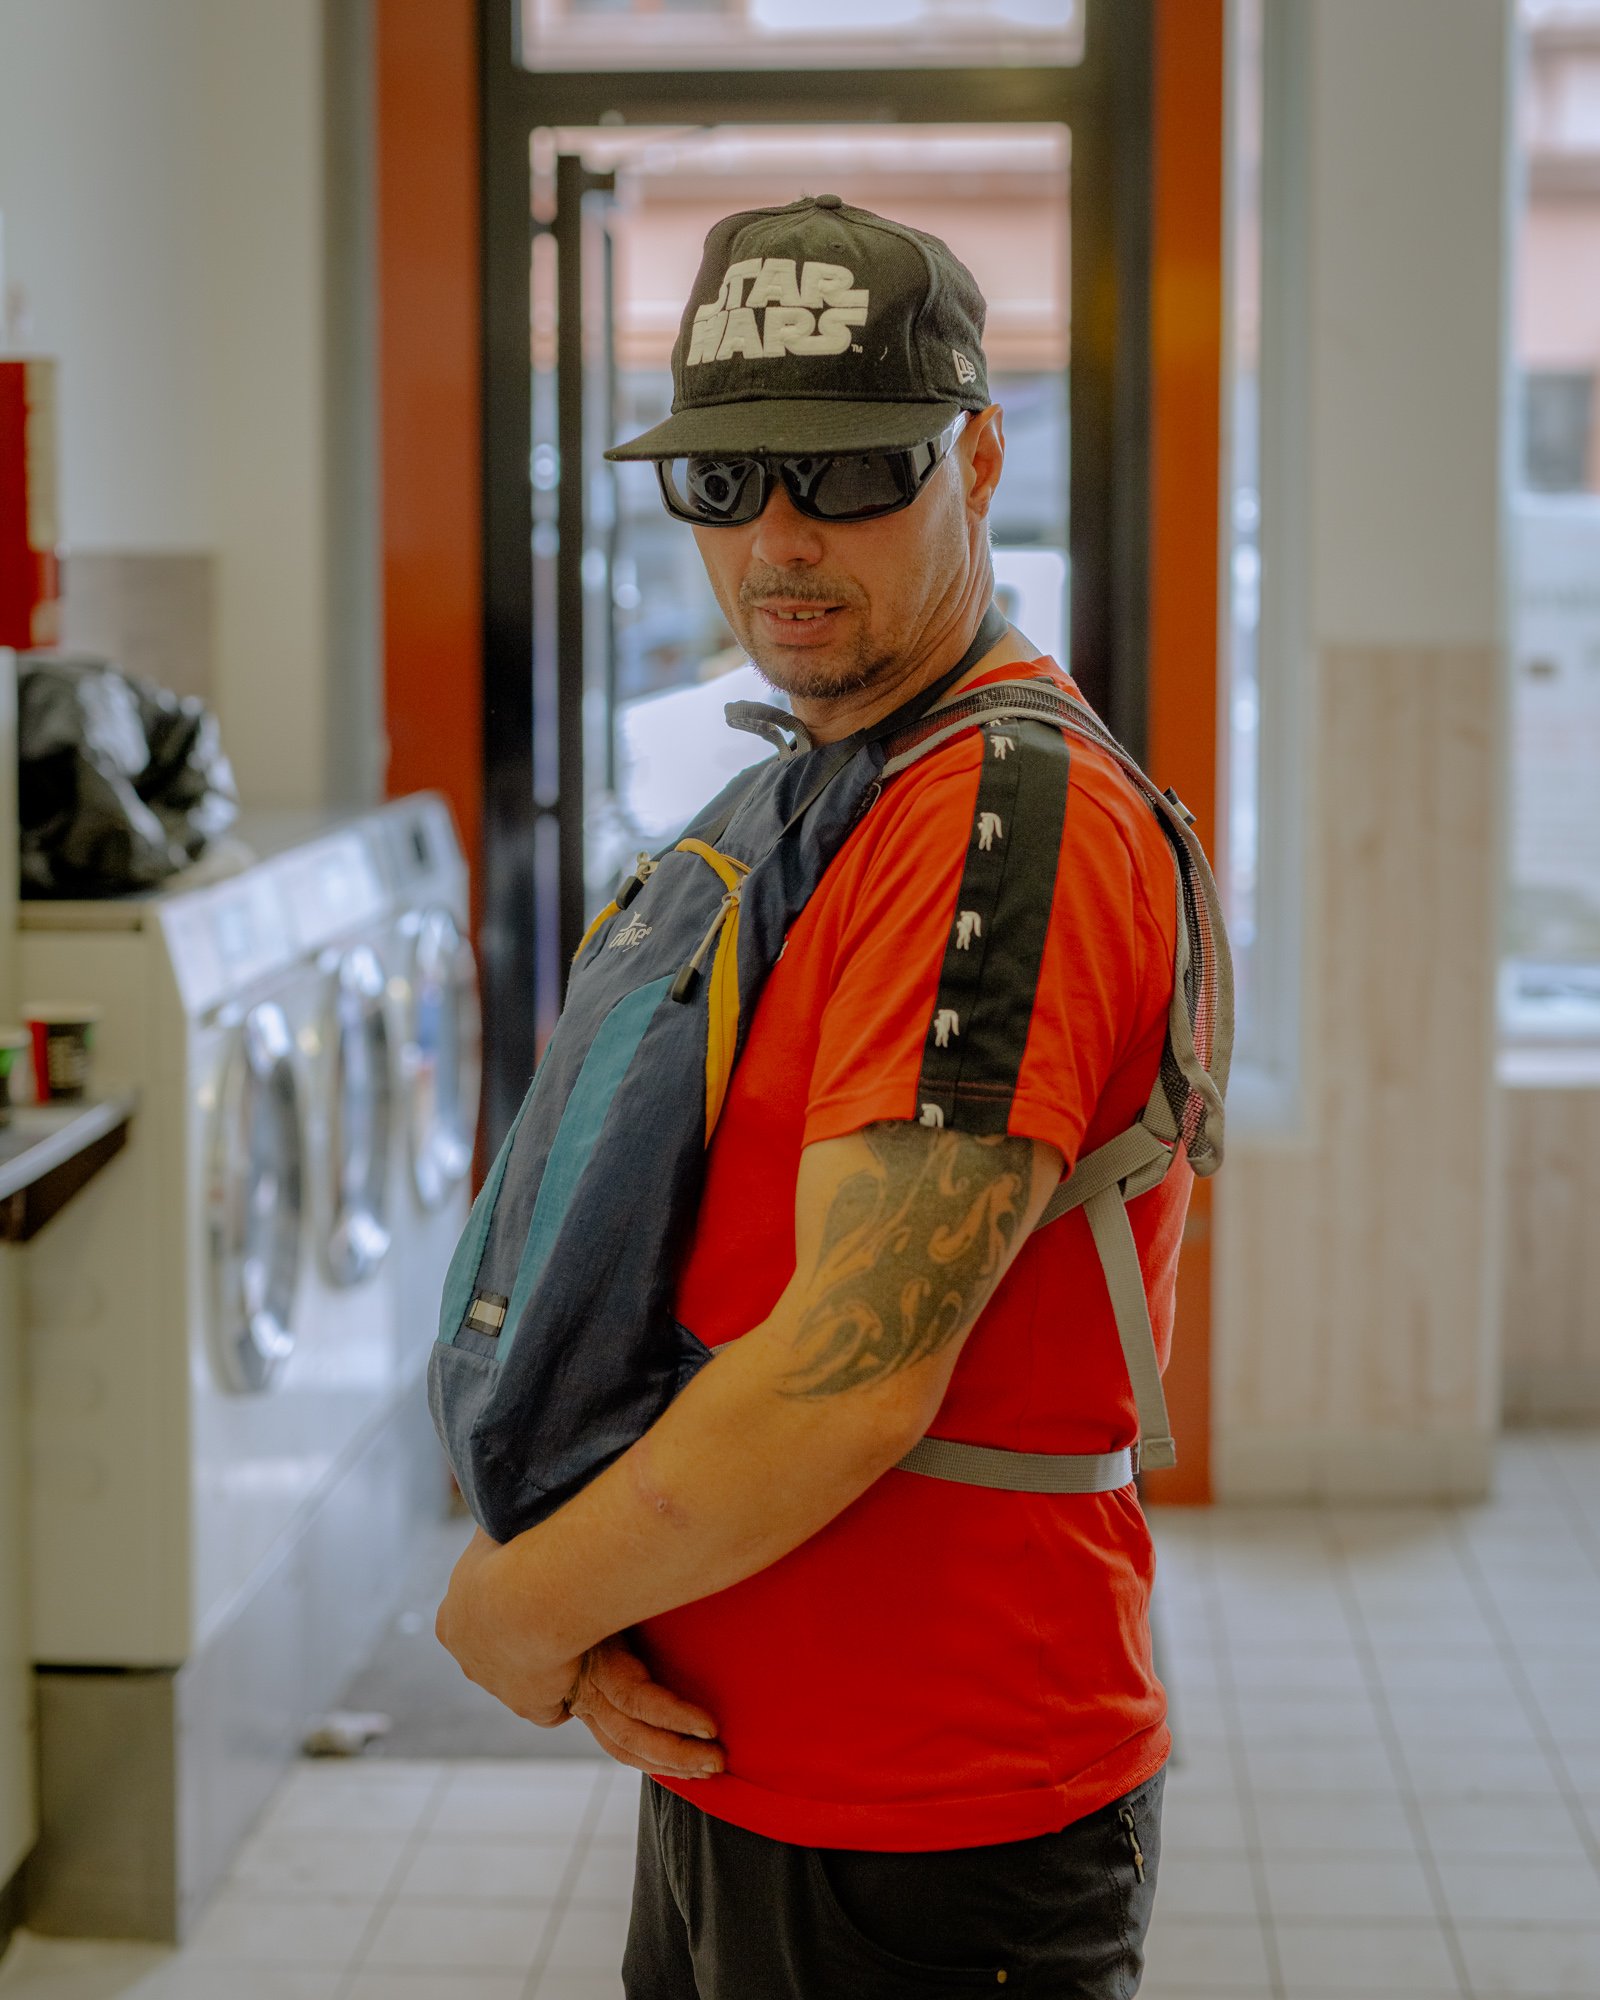 Daniel from Romania lives at the airport. Once a week, he washes his clothes in the salon, throws his worn clothes in the garbage can and puts on something new.